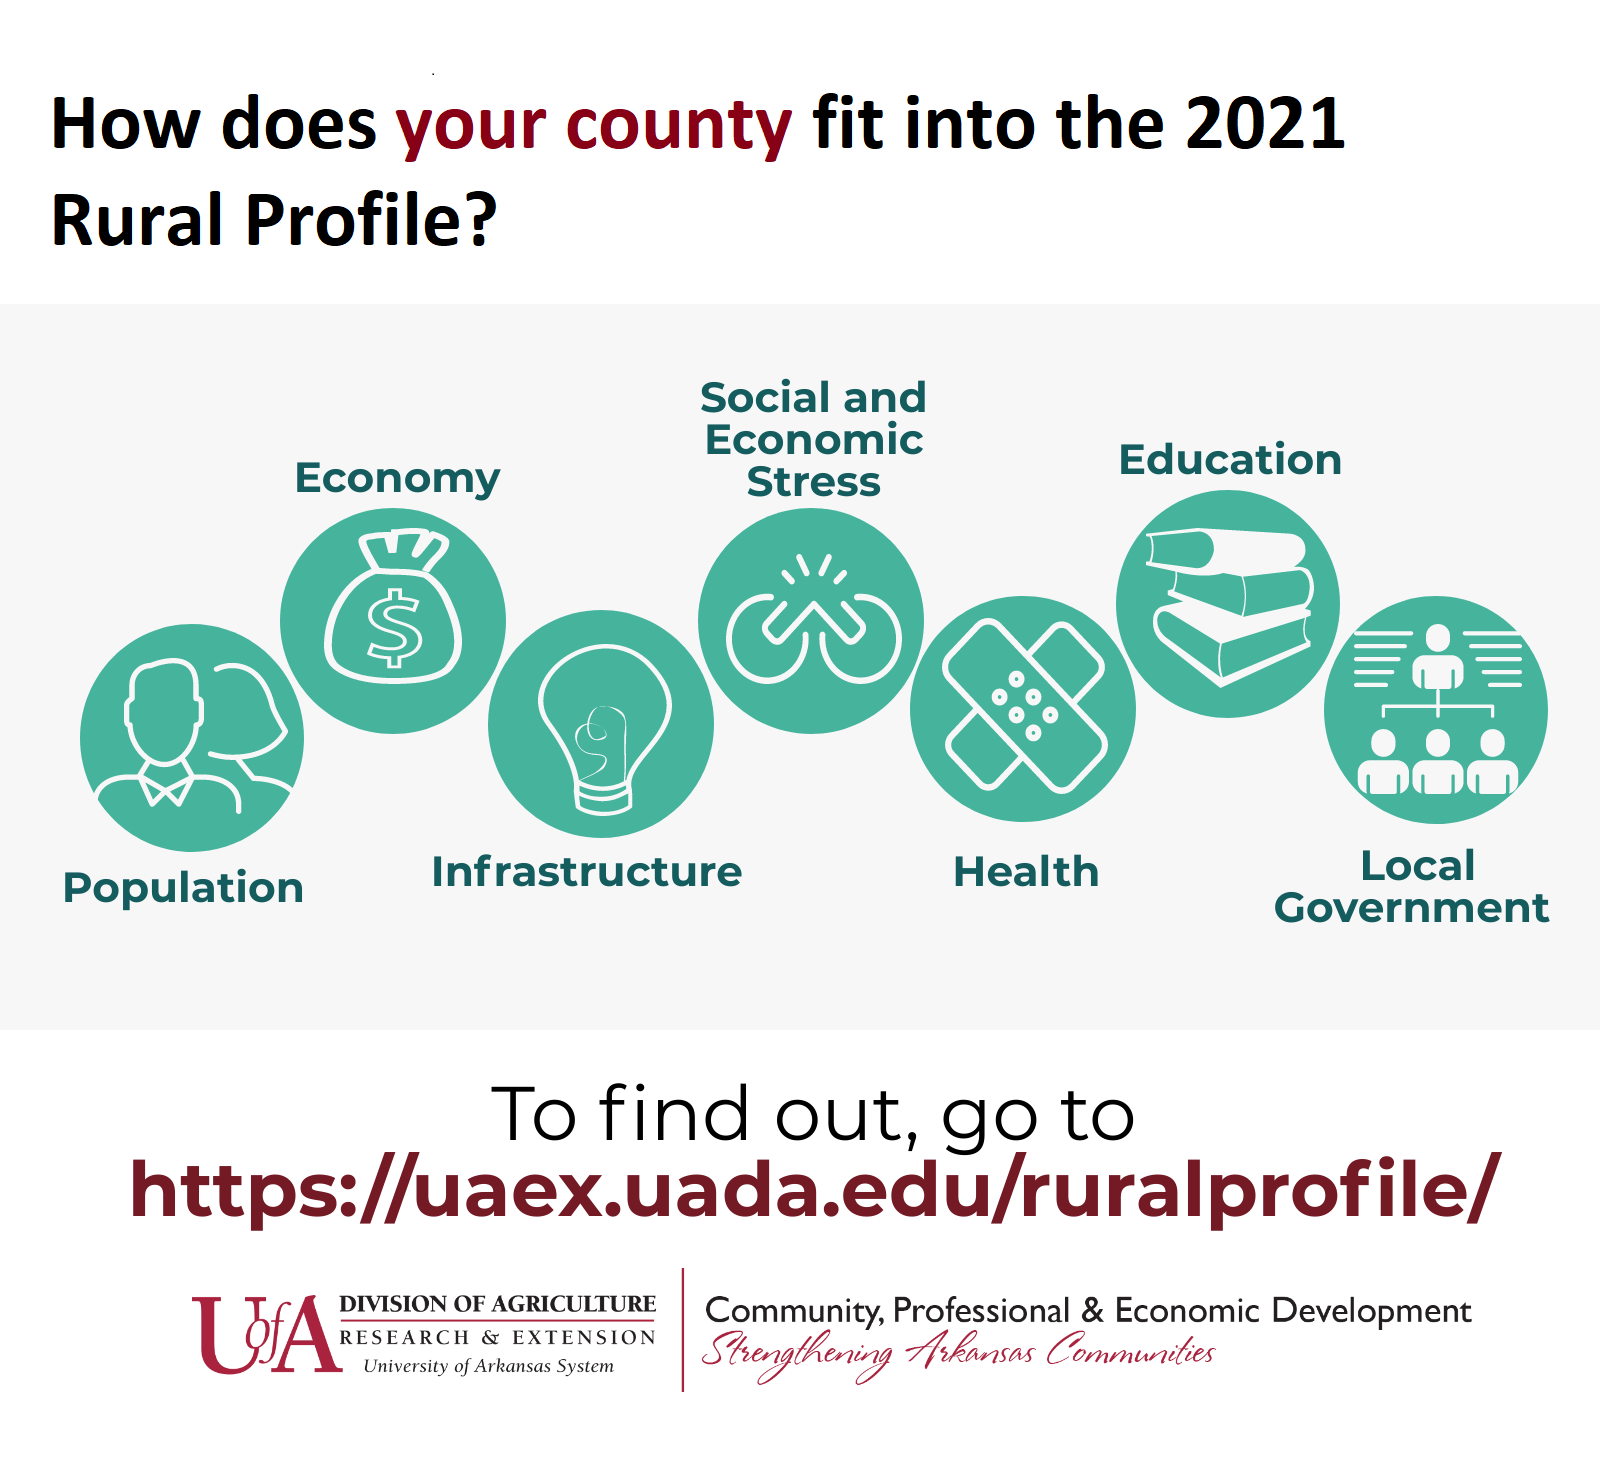 Infographic showing an icon for each chapter in the Rural Profile of Arkansas. An outline of two people for population, a money bag icon for economy, a lightbulb icon for infrastructure, a broken link icon for social & economic stress, a bandage icon for health, a book icon for education, and a people hierarchy diagram icon for local government.